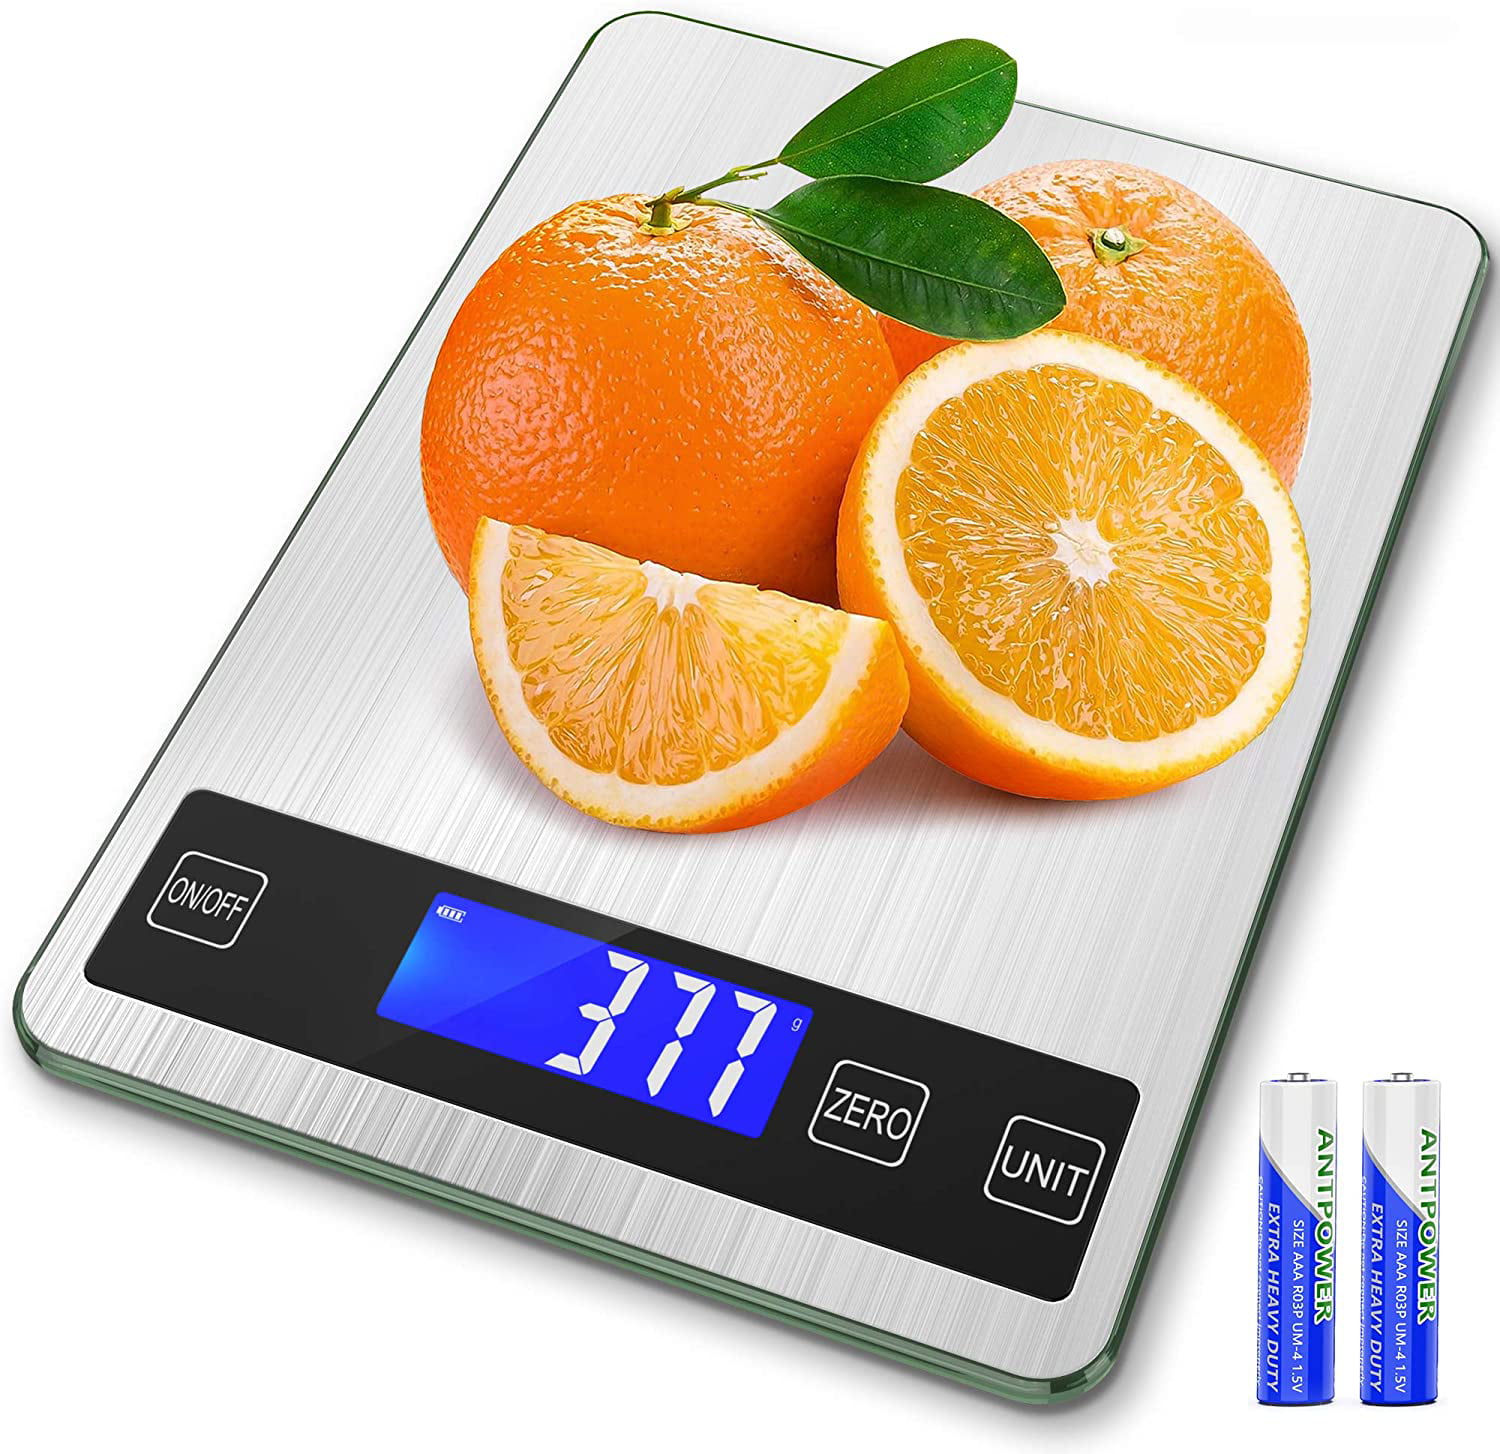 22lb Digital Kitchen Scale Weight Grams and oz for Cooking Baking Food Scale 